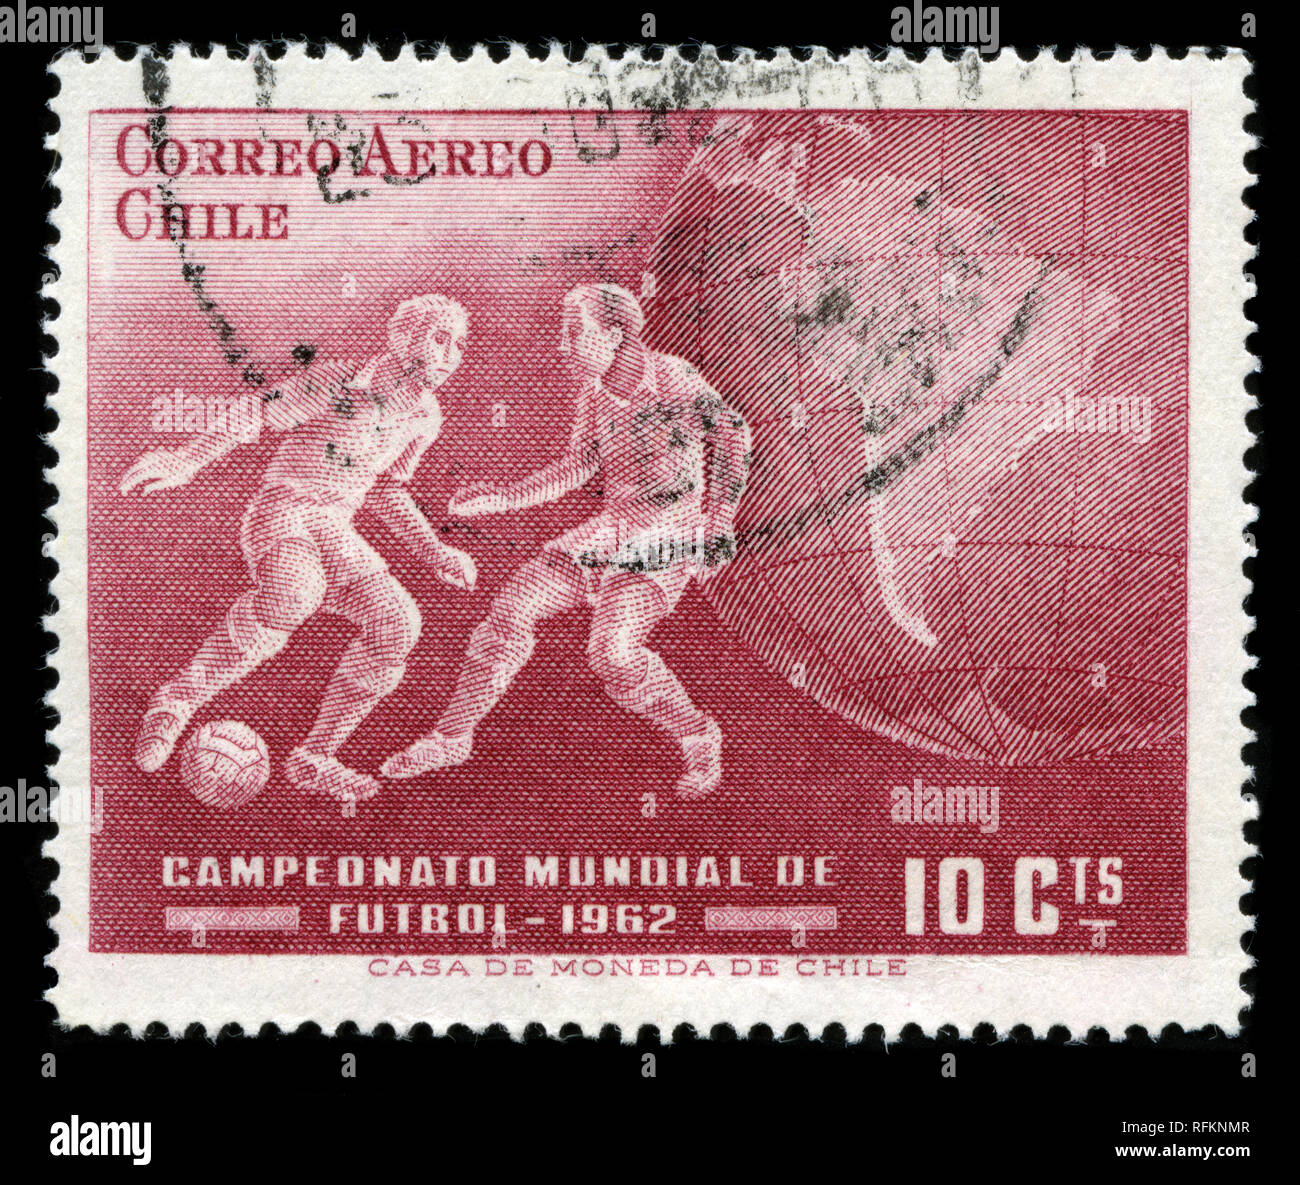 Postage stamp from Chile in the World Football Championship, Chile '62 series issued in 1962 Stock Photo